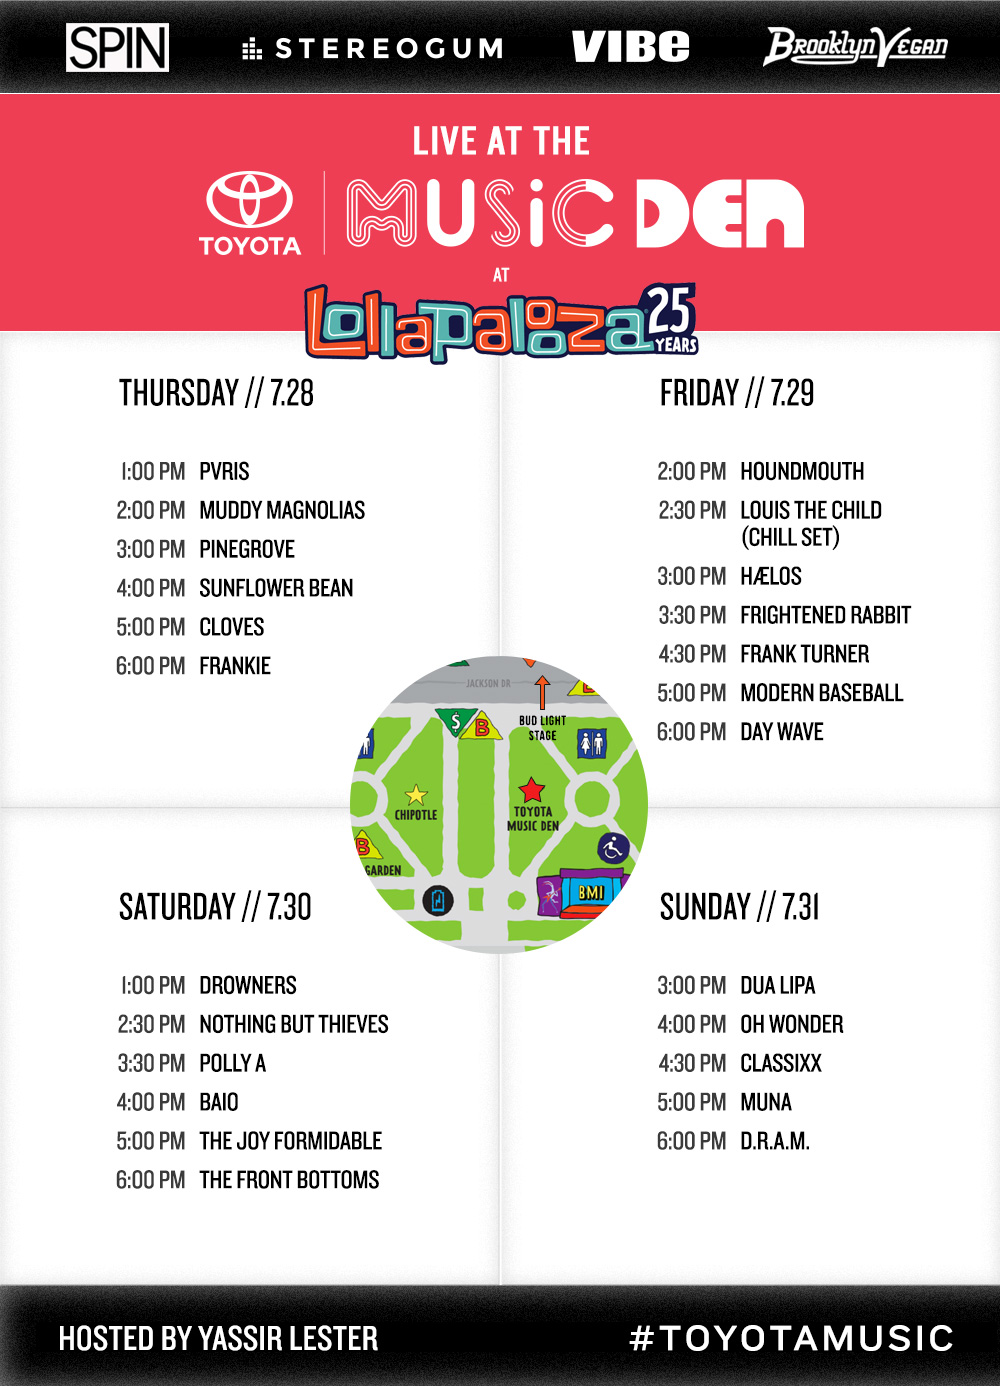 SPIN at Lollapalooza 2016: Toyota Music Den Schedule